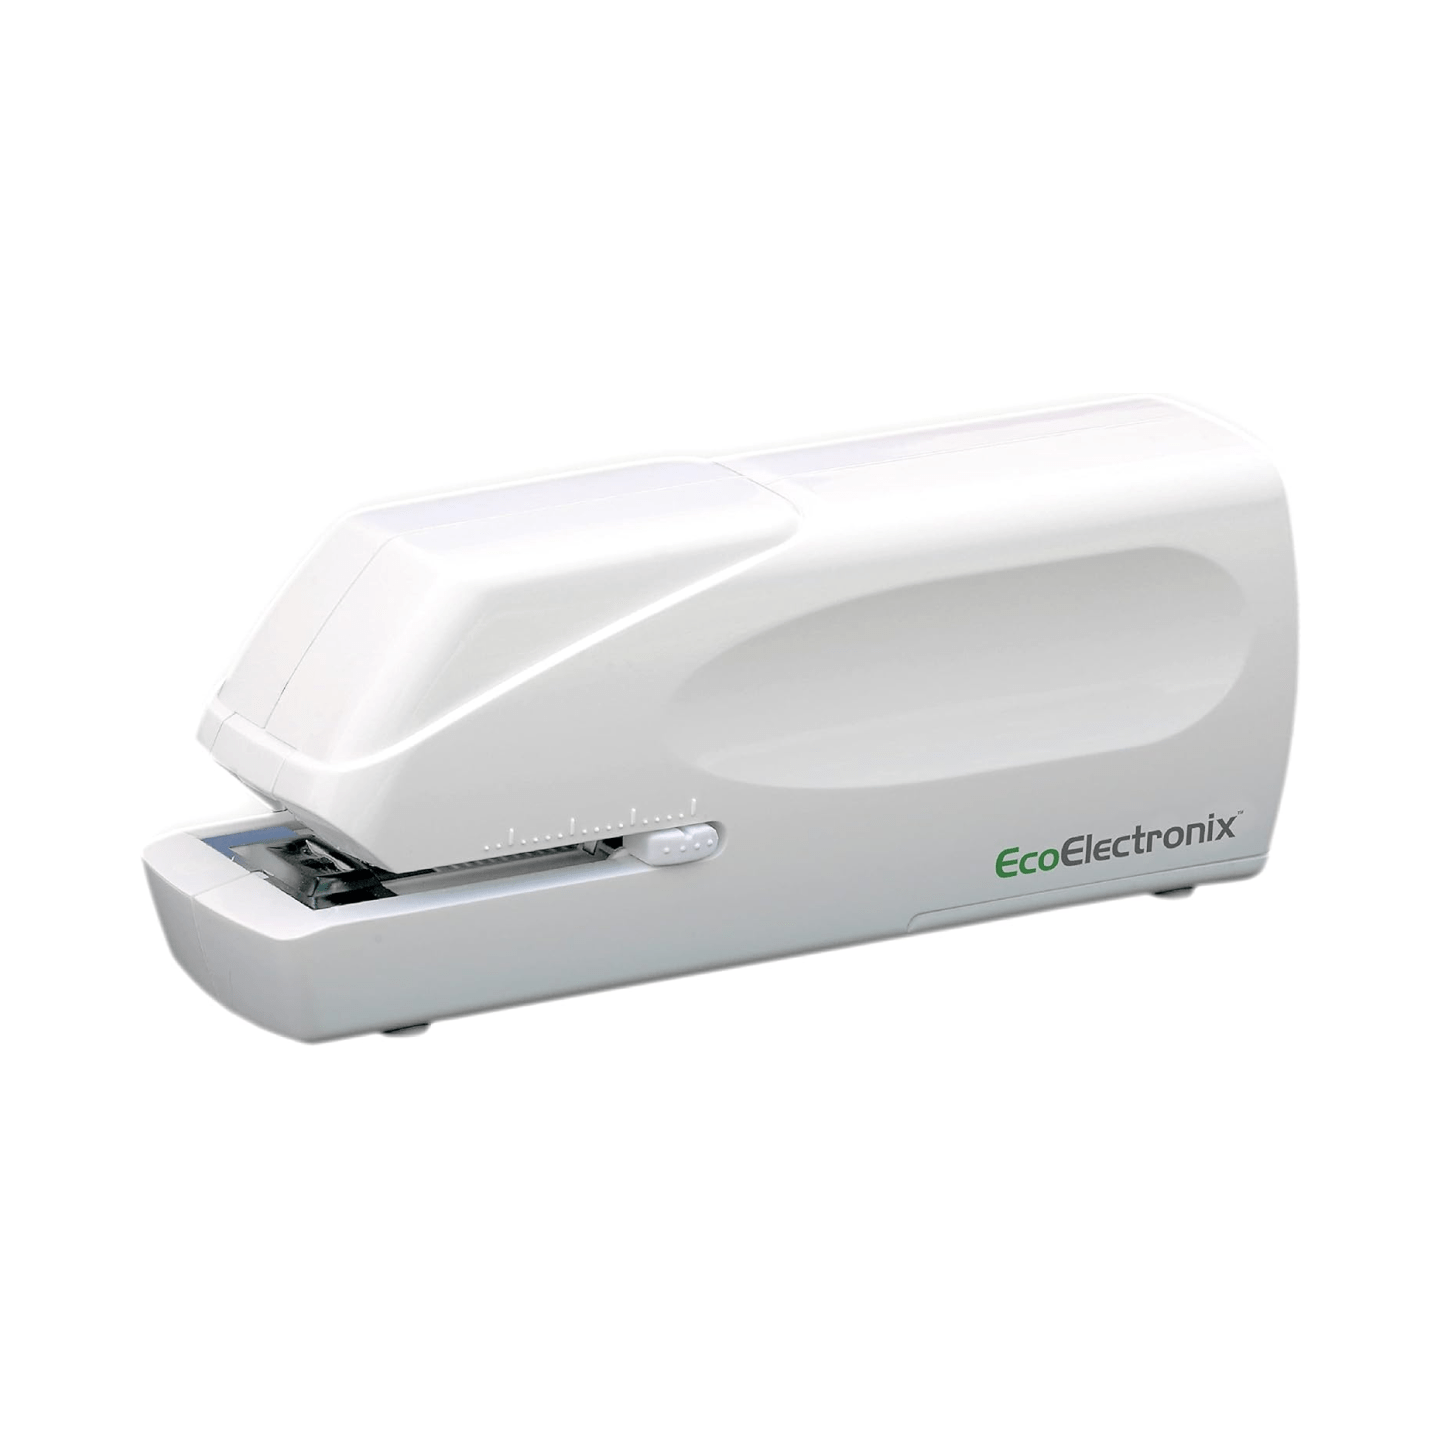 EX-25 Electric Stapler - Heavy Duty Automatic Jam-Free Commercial Office Stapler - 25 Sheet Capacity